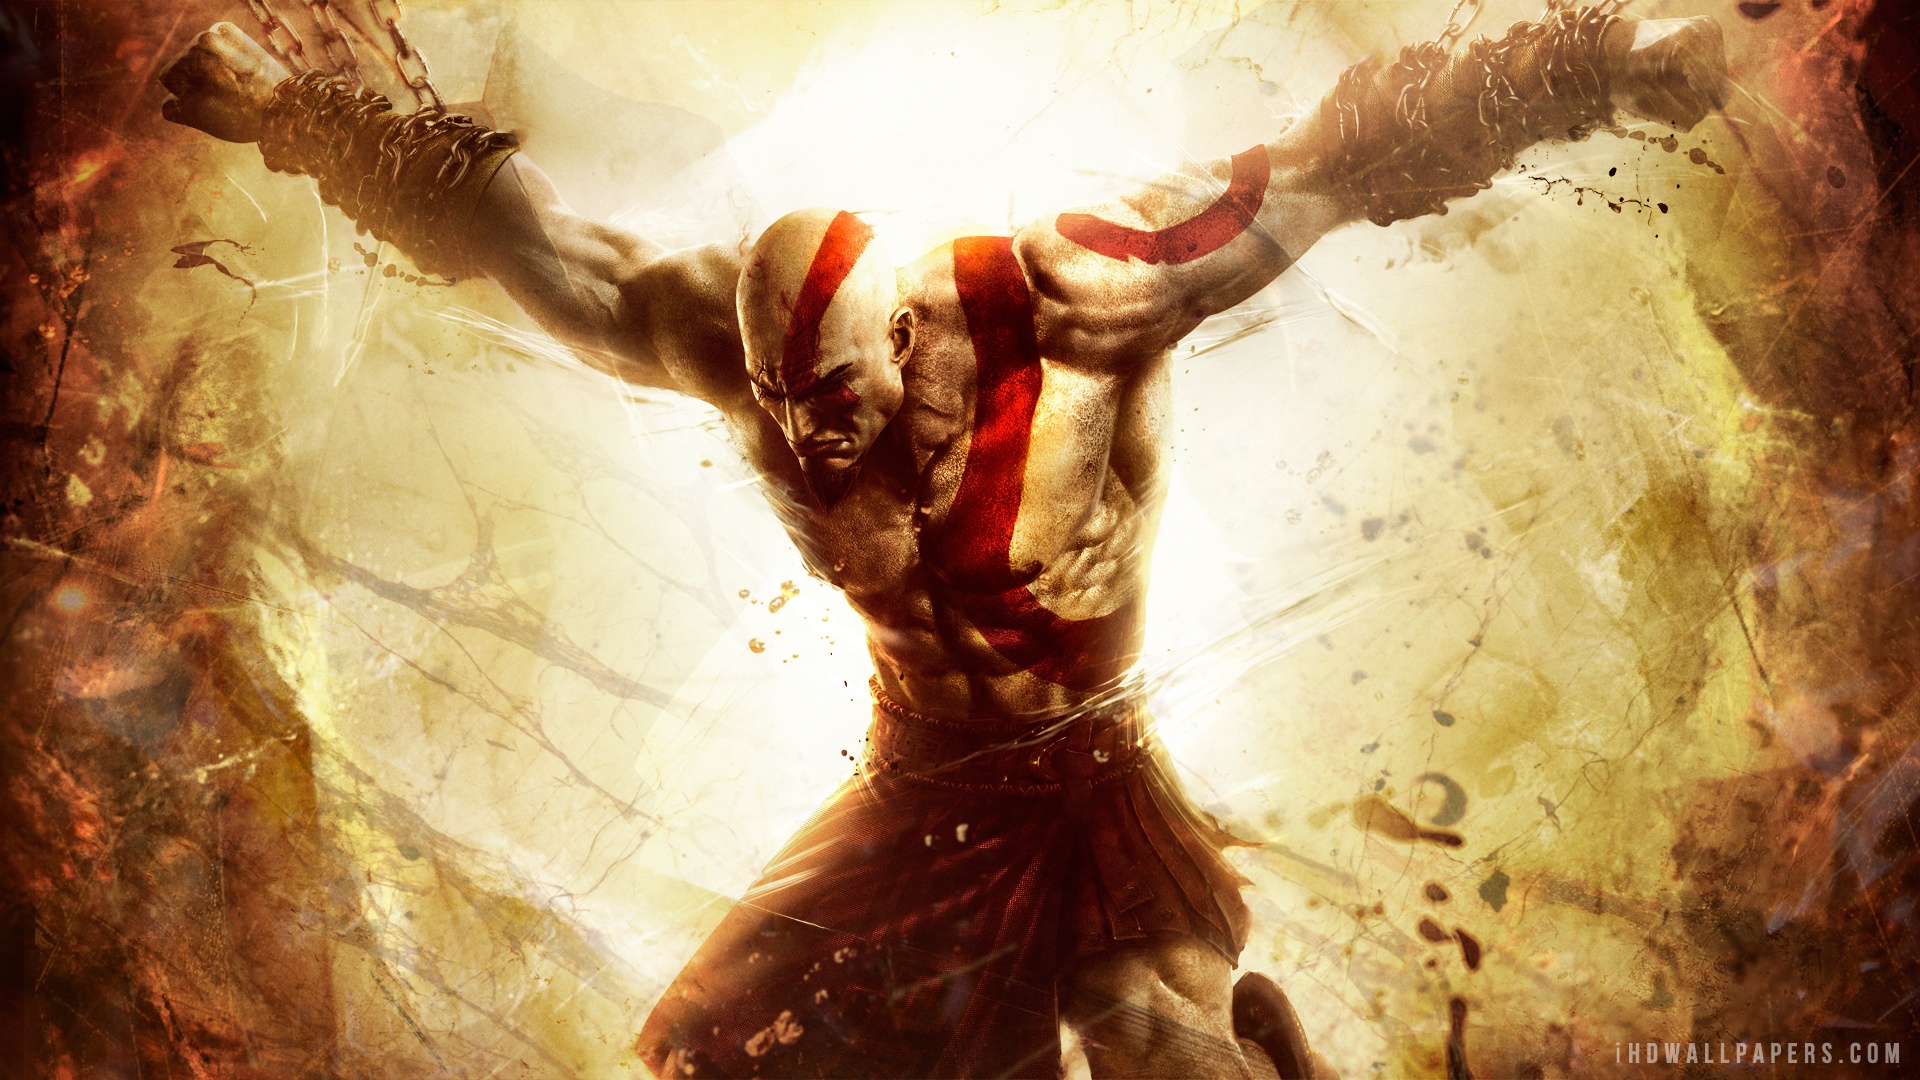 God of War Ascension PS3 Game HD Wallpaper   iHD Wallpapers 1920x1080